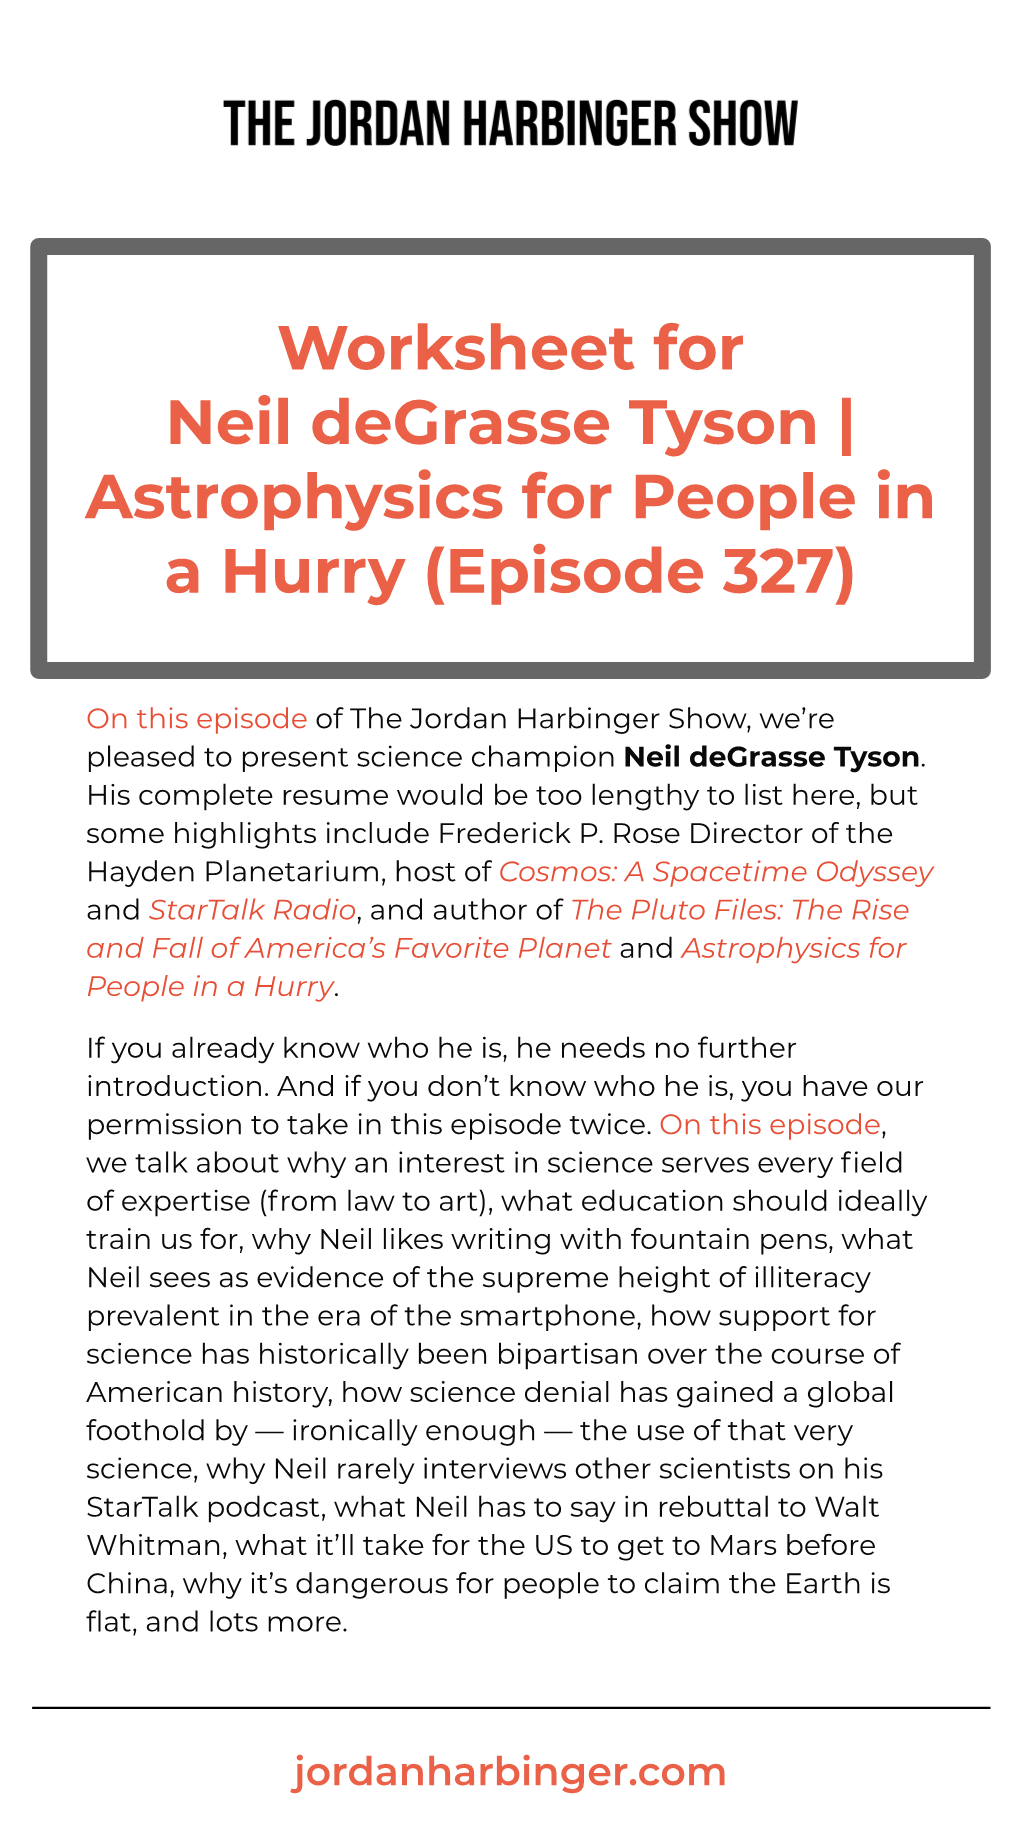 Worksheet for Neil Degrasse Tyson | Astrophysics for People in a Hurry (Episode 327)